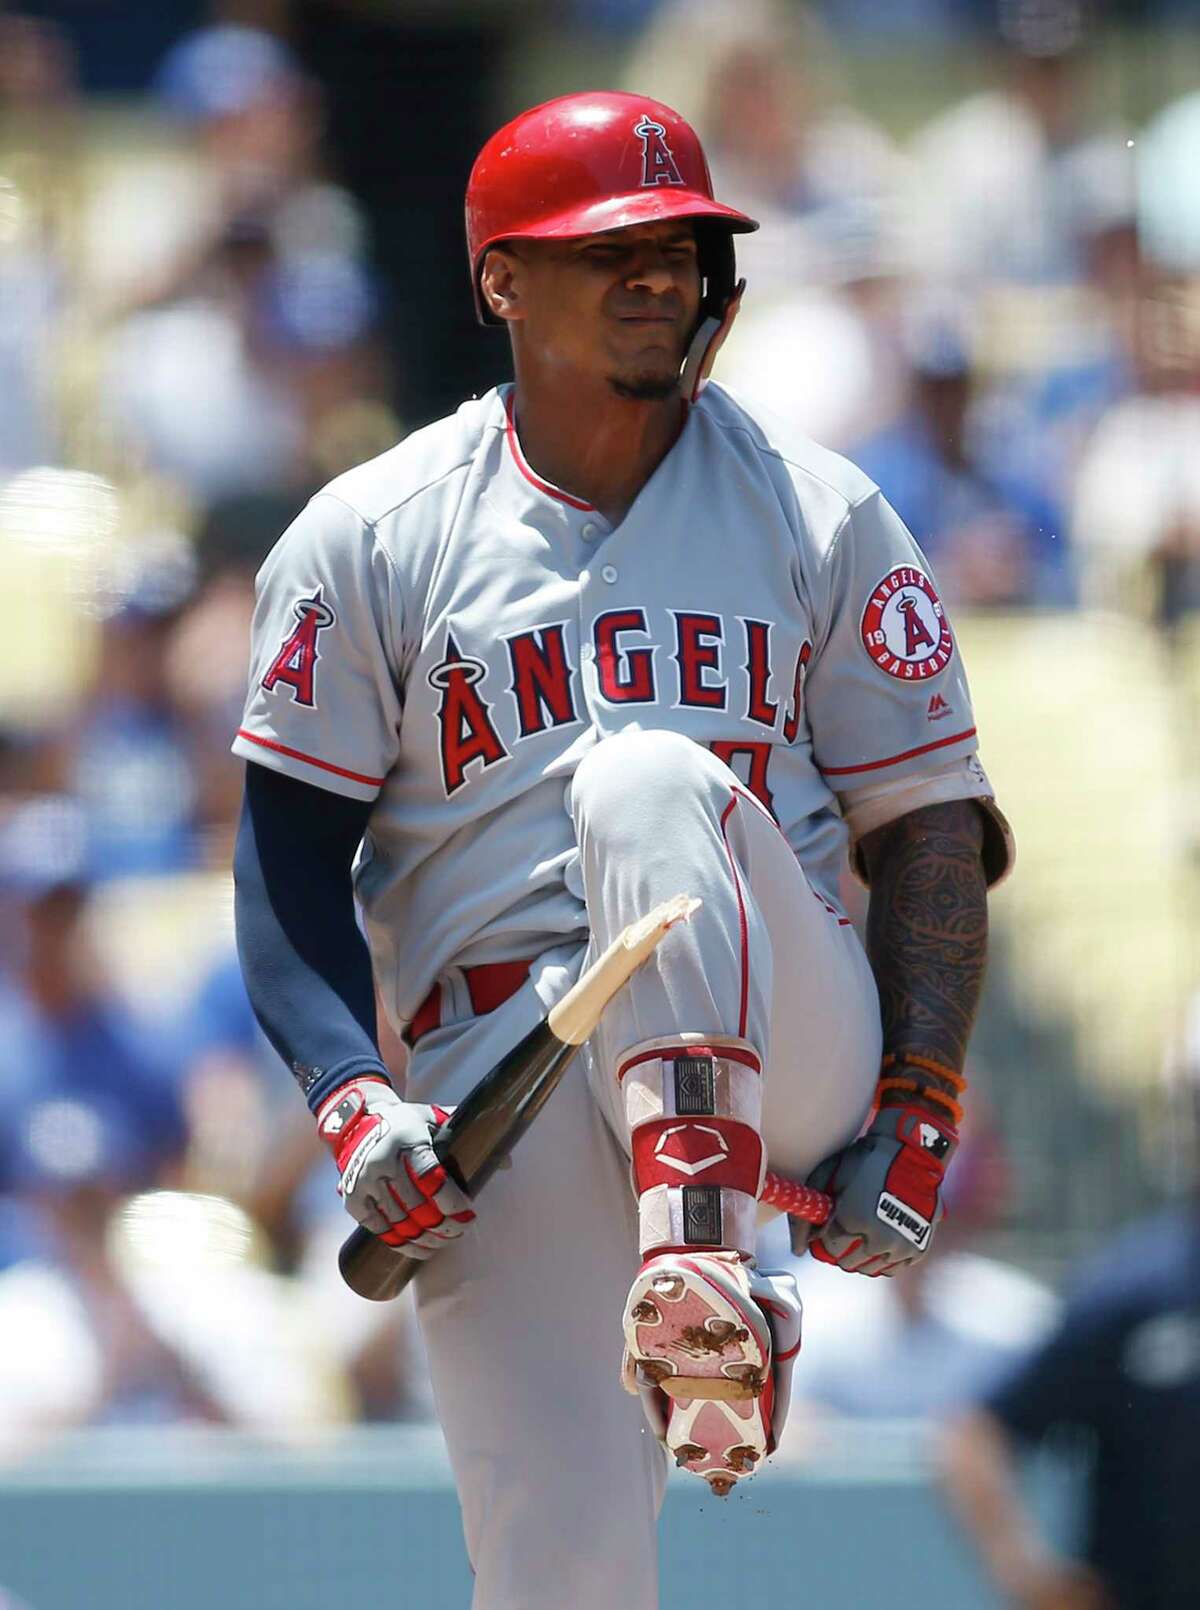 Los Angeles Angels Jefry Marte breaks his bat over his leg after striking out on a full count pitch from Los Angeles Dodgers starting pitcher Clayton Kershaw, not pictured to end the top of the first inning of a baseball game leaving the bases loaded Sunday, July 15, 2018, in Los Angeles. (AP Photo/Danny Moloshok)